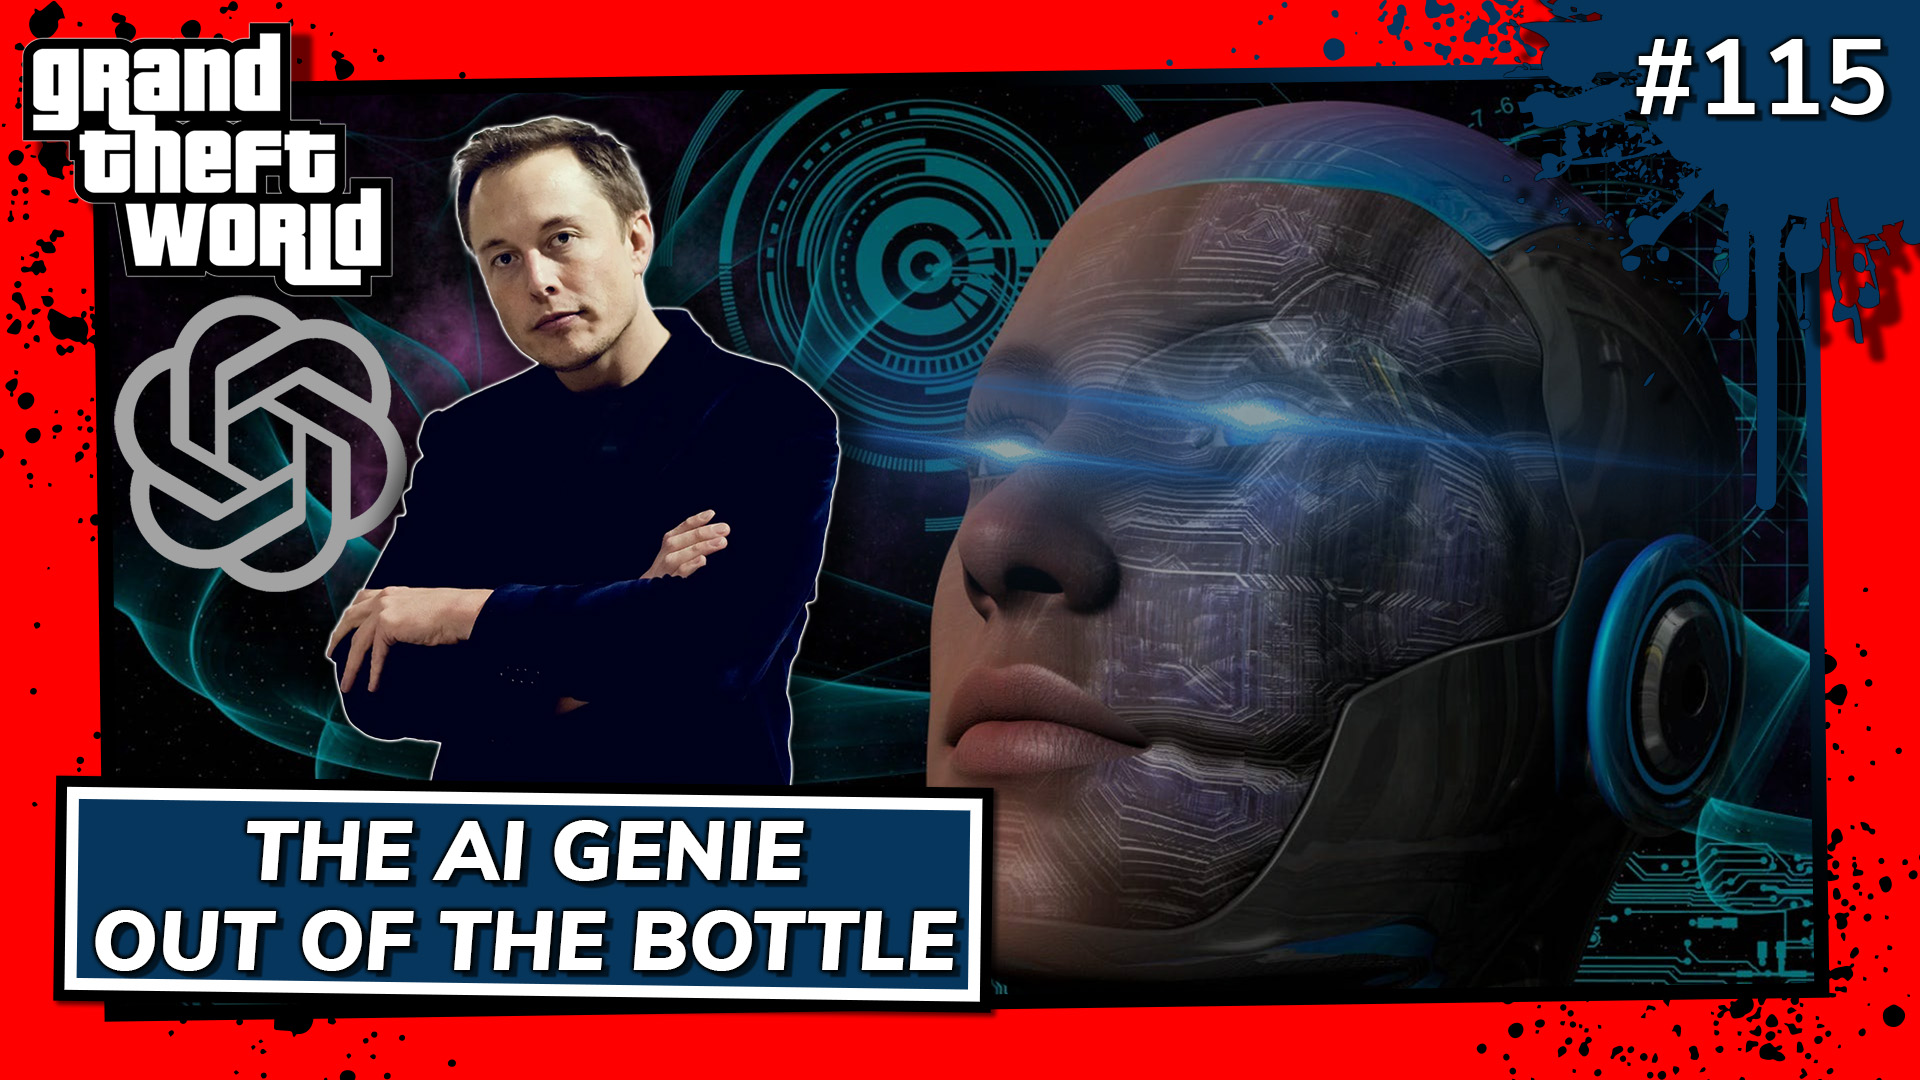 Grand Theft World Podcast 115 | The AI Genie out of the Bottle